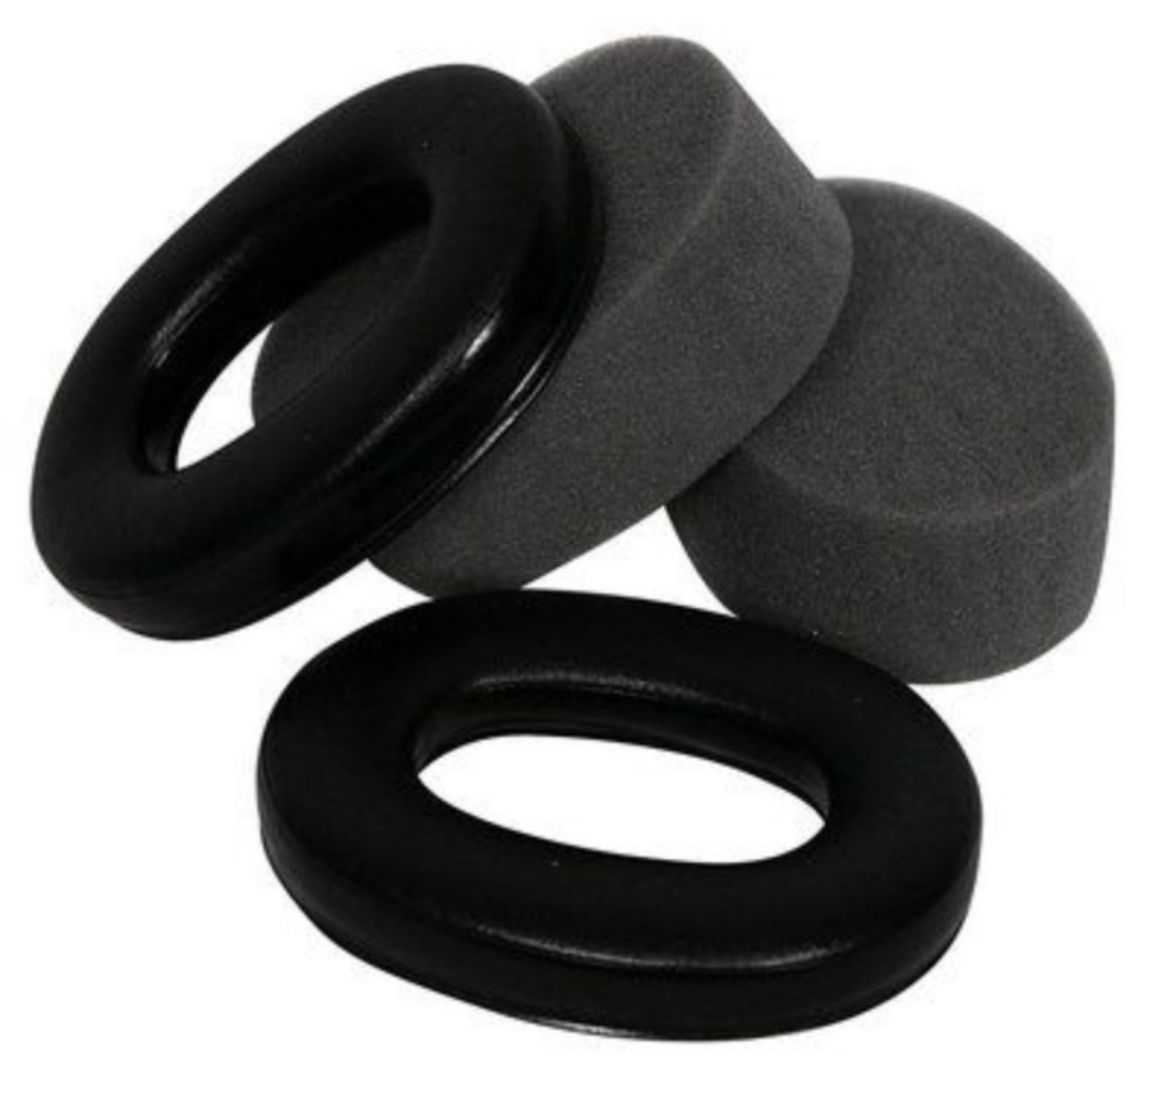 Picture of HY54 PELTOR™ HYGIENE KIT FOR H10 MODELS BLACK & GREY EARMUFF REPLACEMENT COMPONENTS